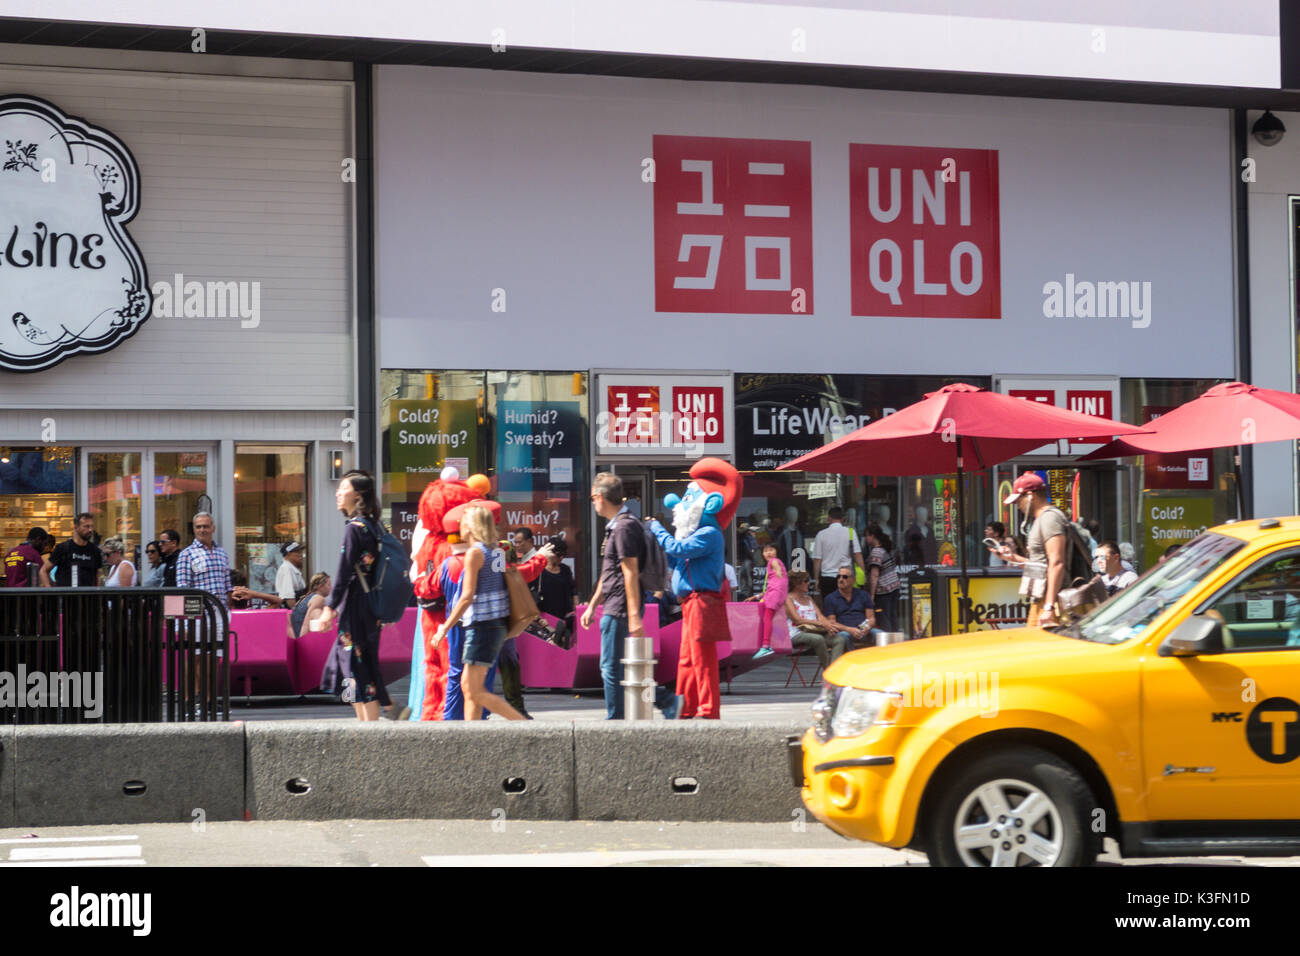 Uniqlo Storefront in Times Square, NYC, USA Stock Photo - Alamy